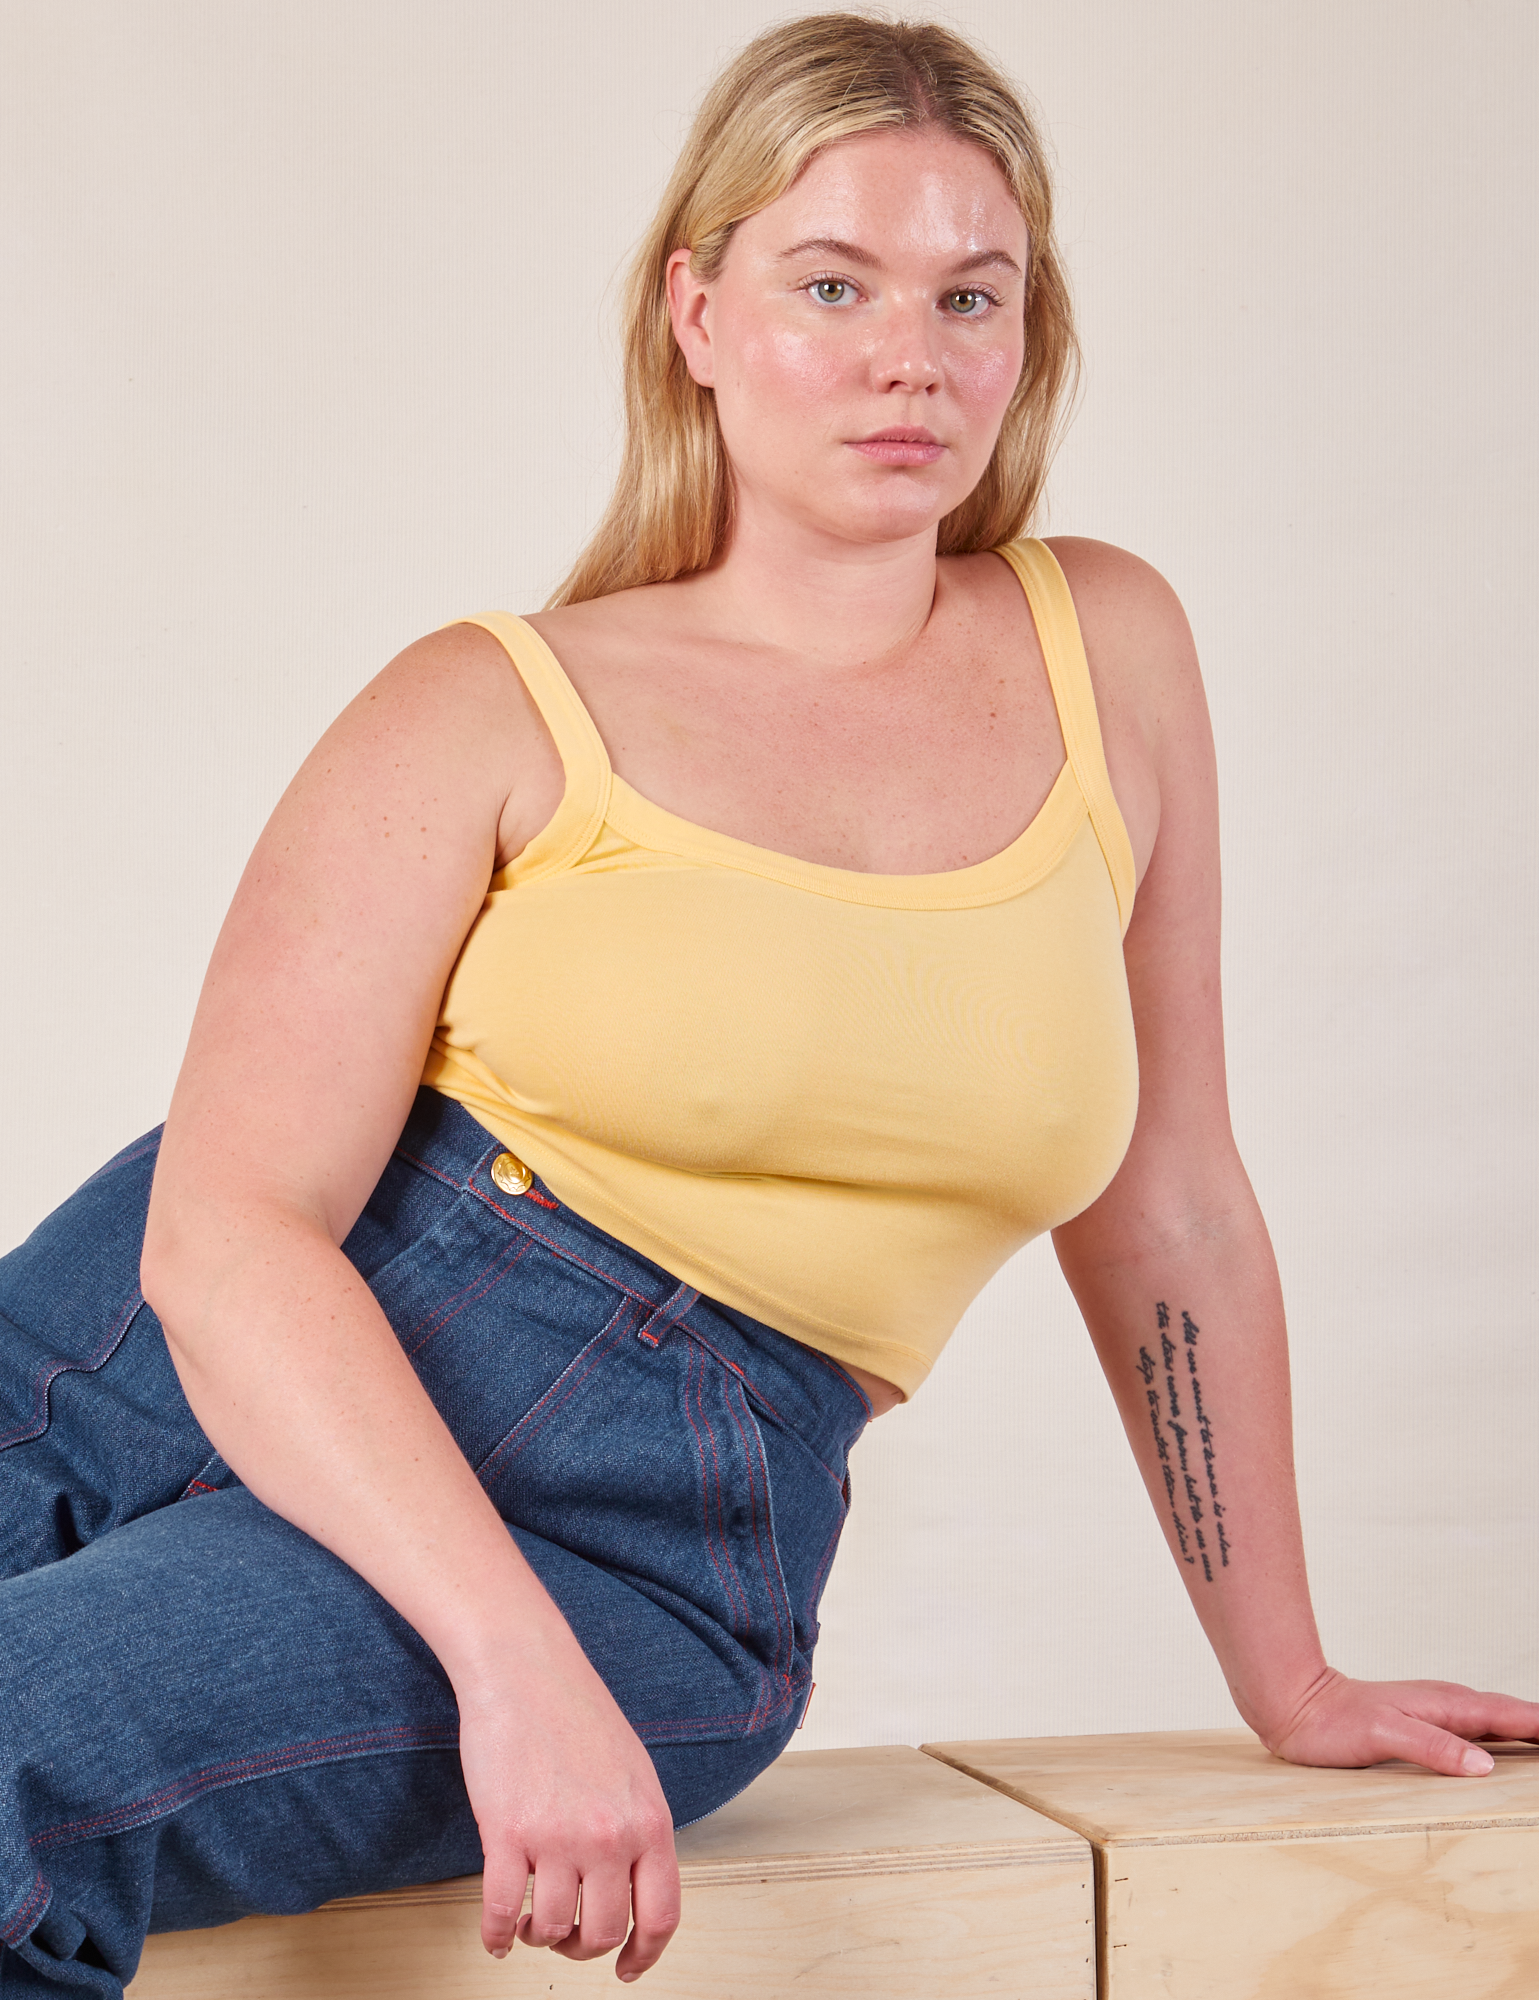 Lish is wearing Cropped Cami in Butter Yellow and dark wash Carpenter Jeans